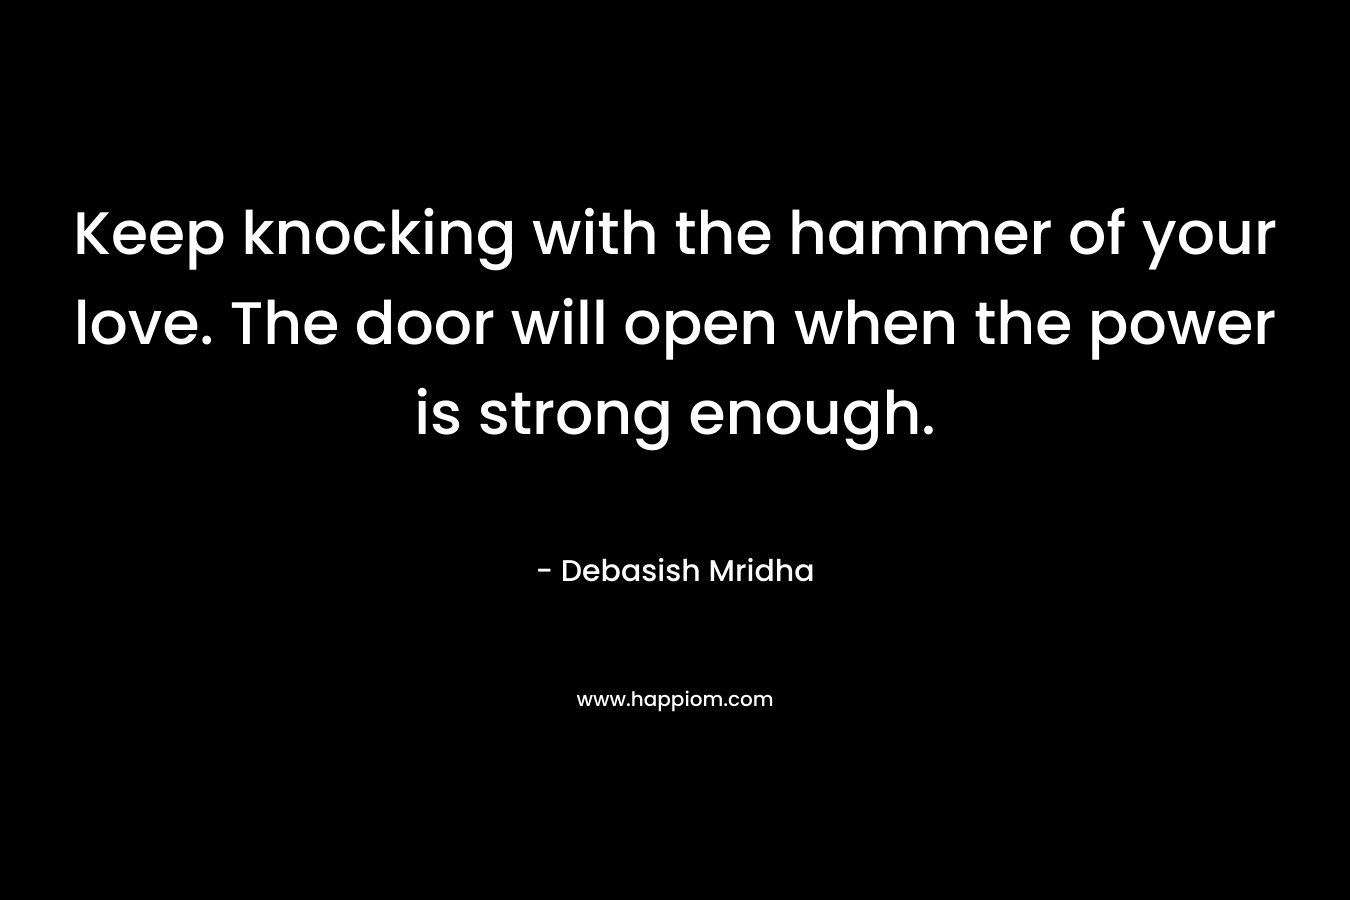 Keep knocking with the hammer of your love. The door will open when the power is strong enough. – Debasish Mridha